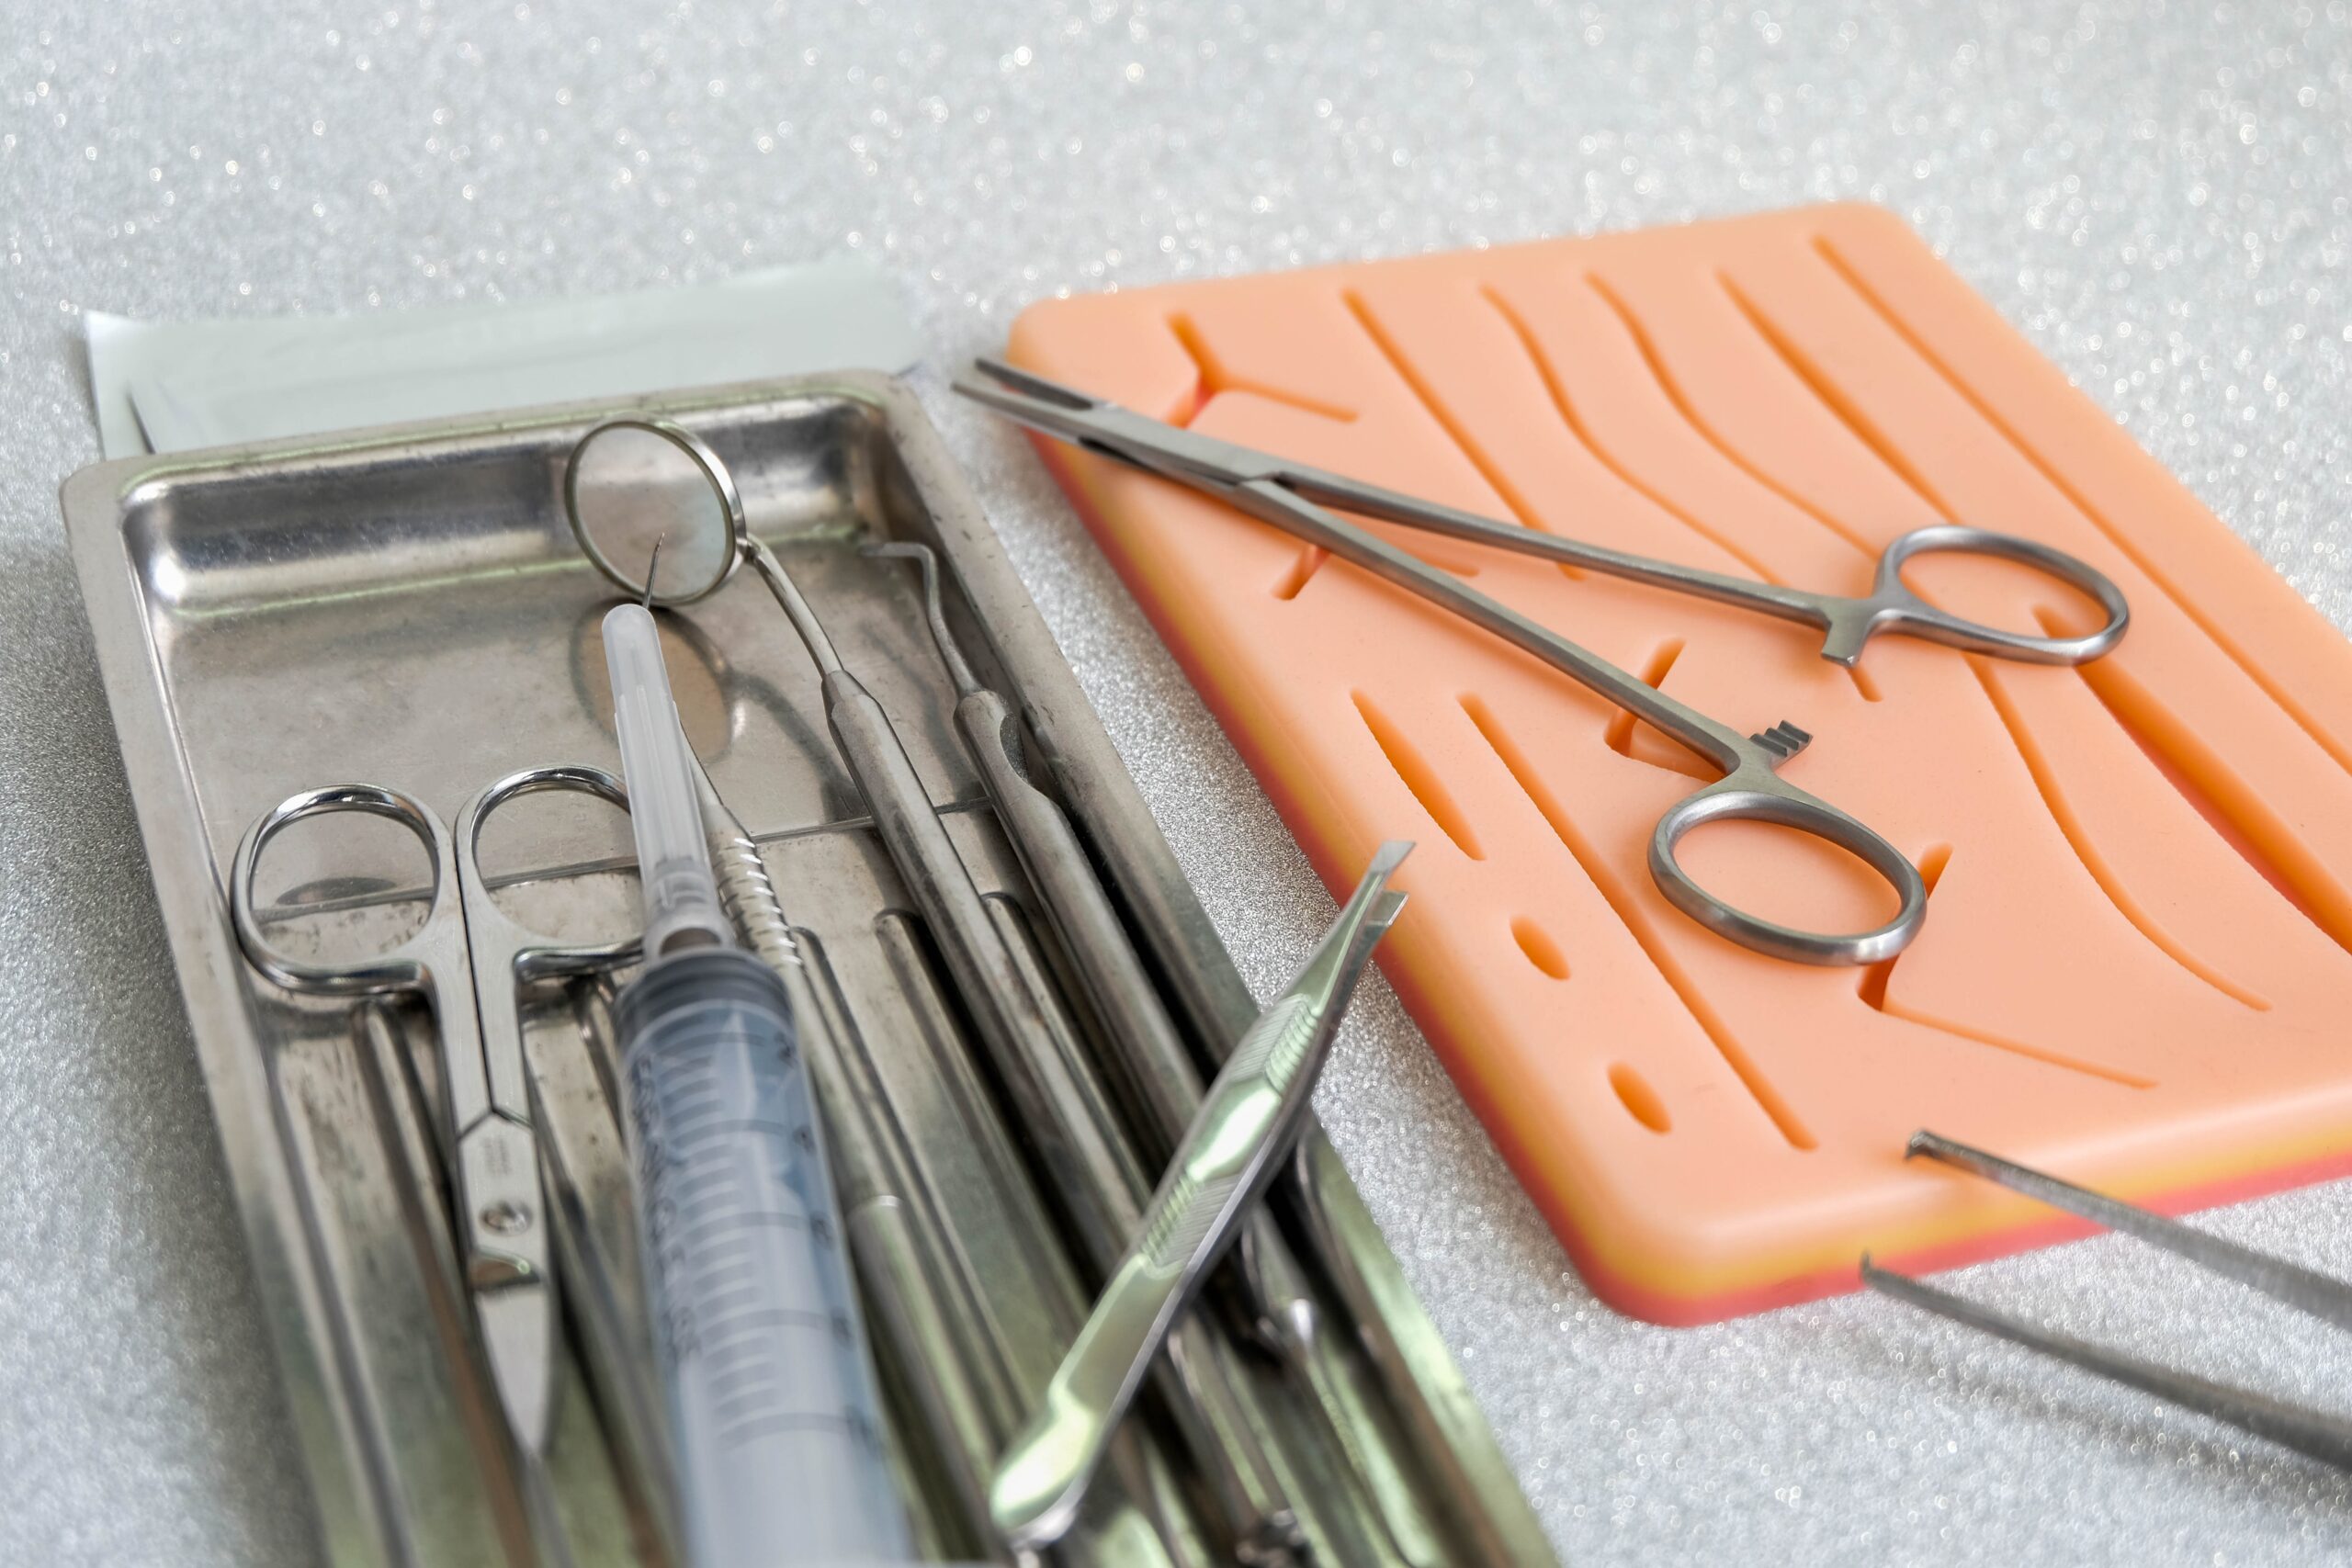 Suture Mastery Unleashed: The Ultimate Guide to Choosing and Using Top-Notch Suture Kits